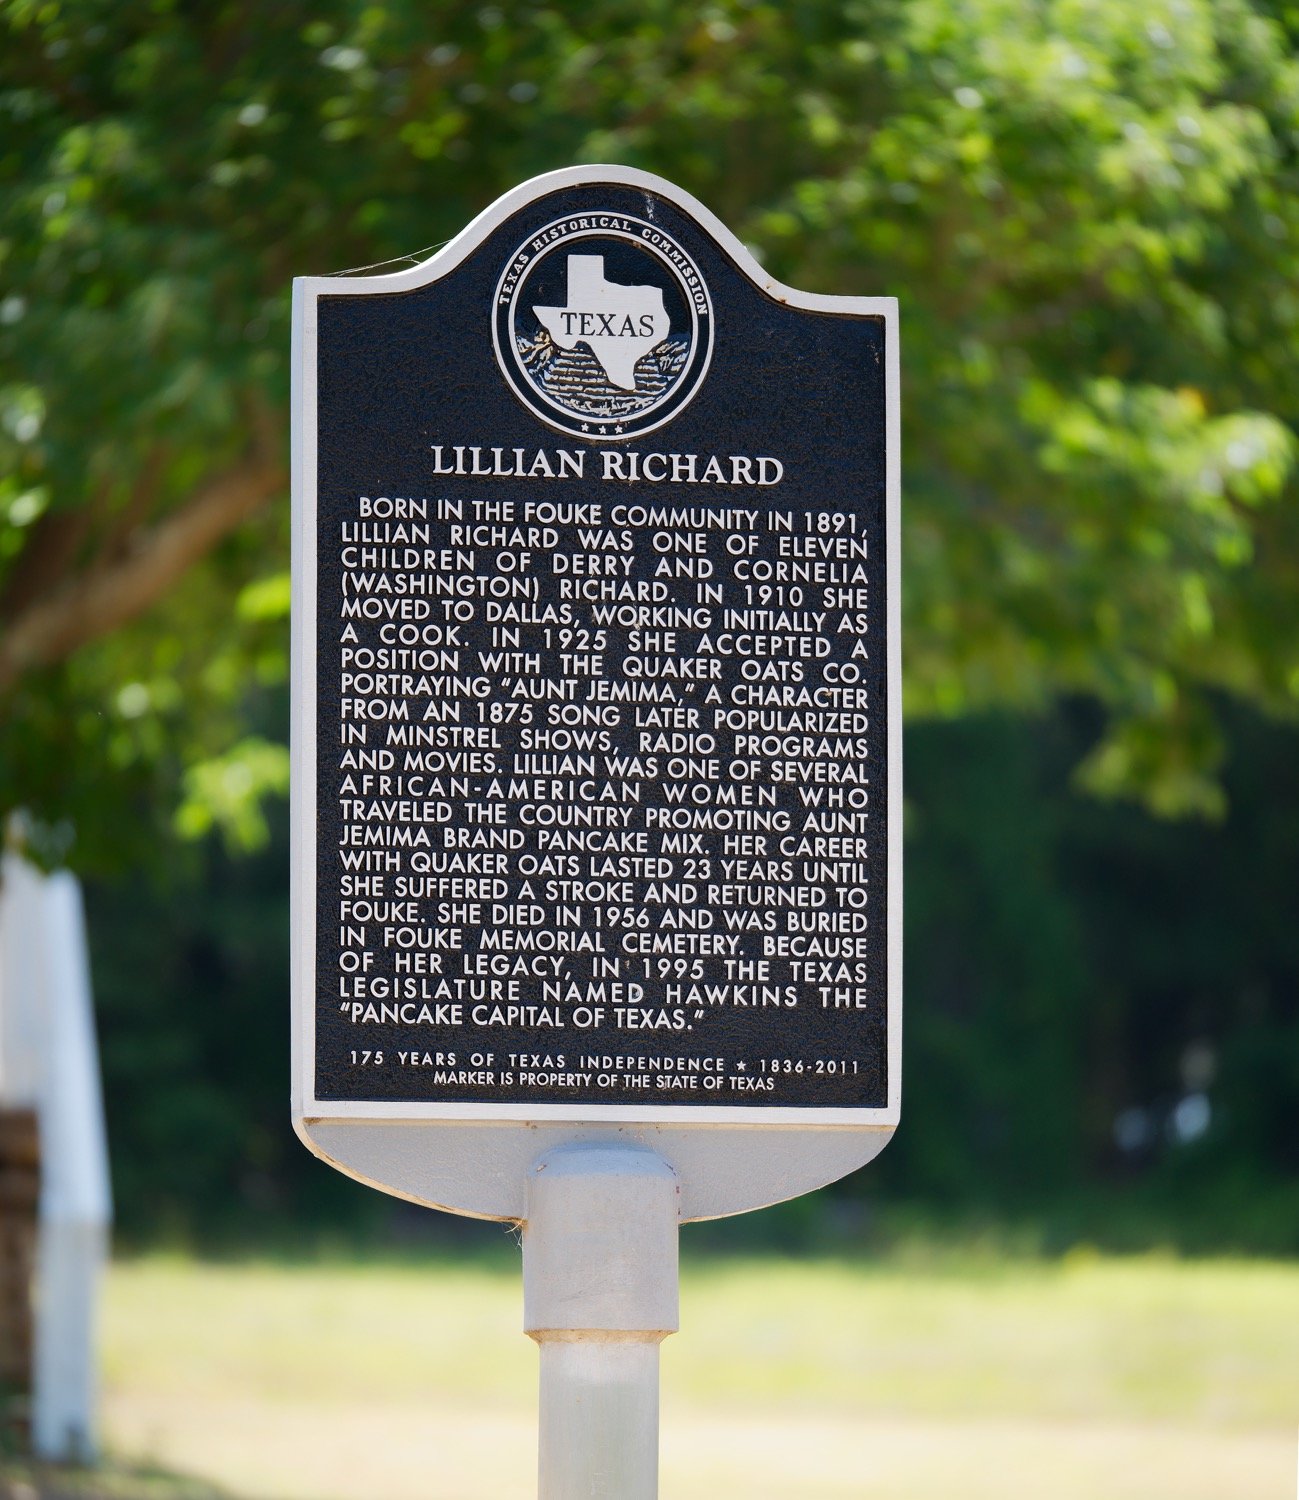 A state historical marker honoring Lillian Richard was dedicated at the Fouke Community Center in 2012.